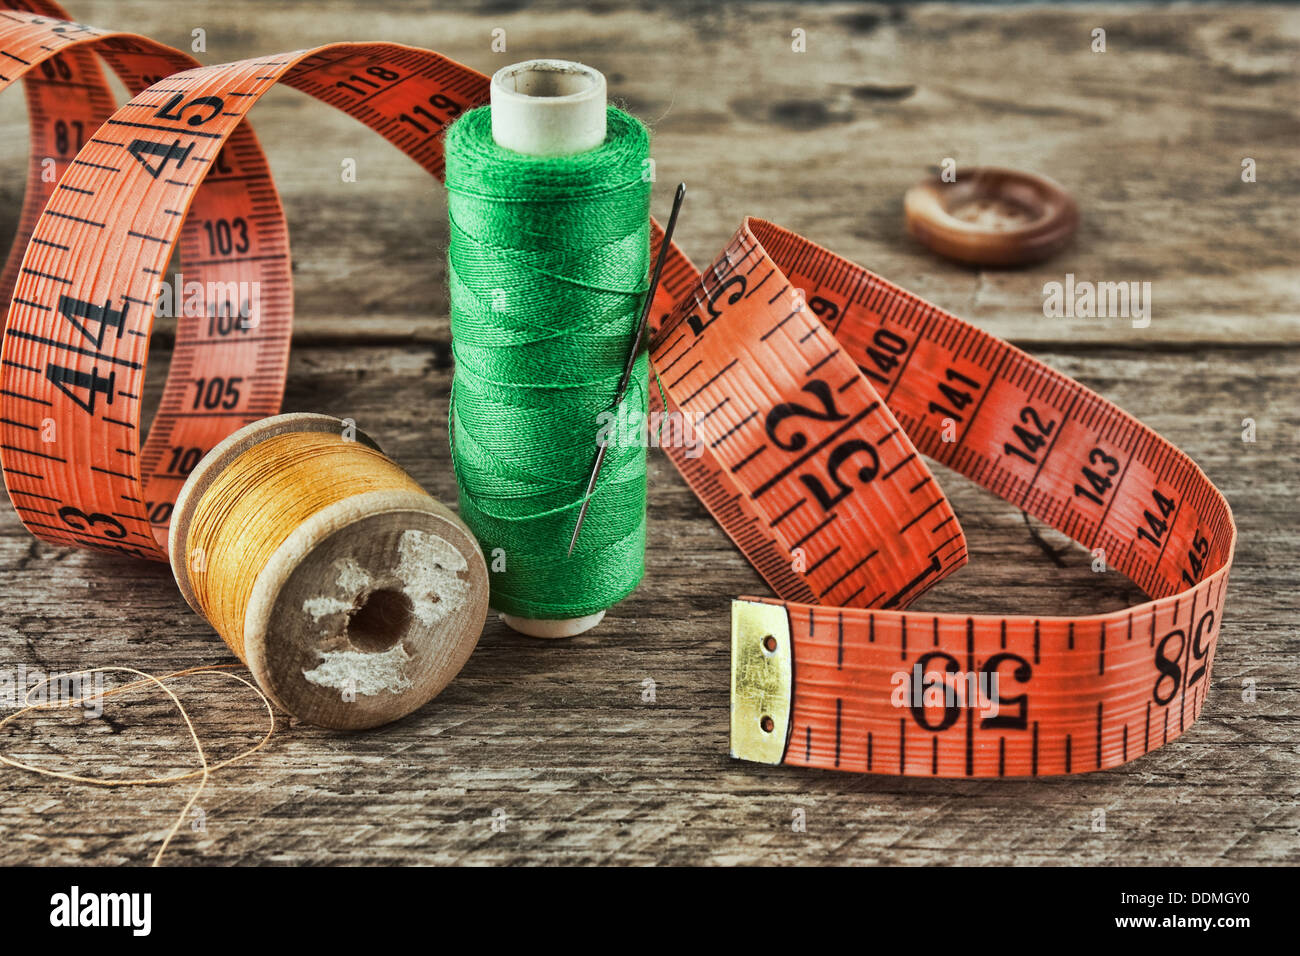 still life of spools of thread on a wooden background Stock Photo